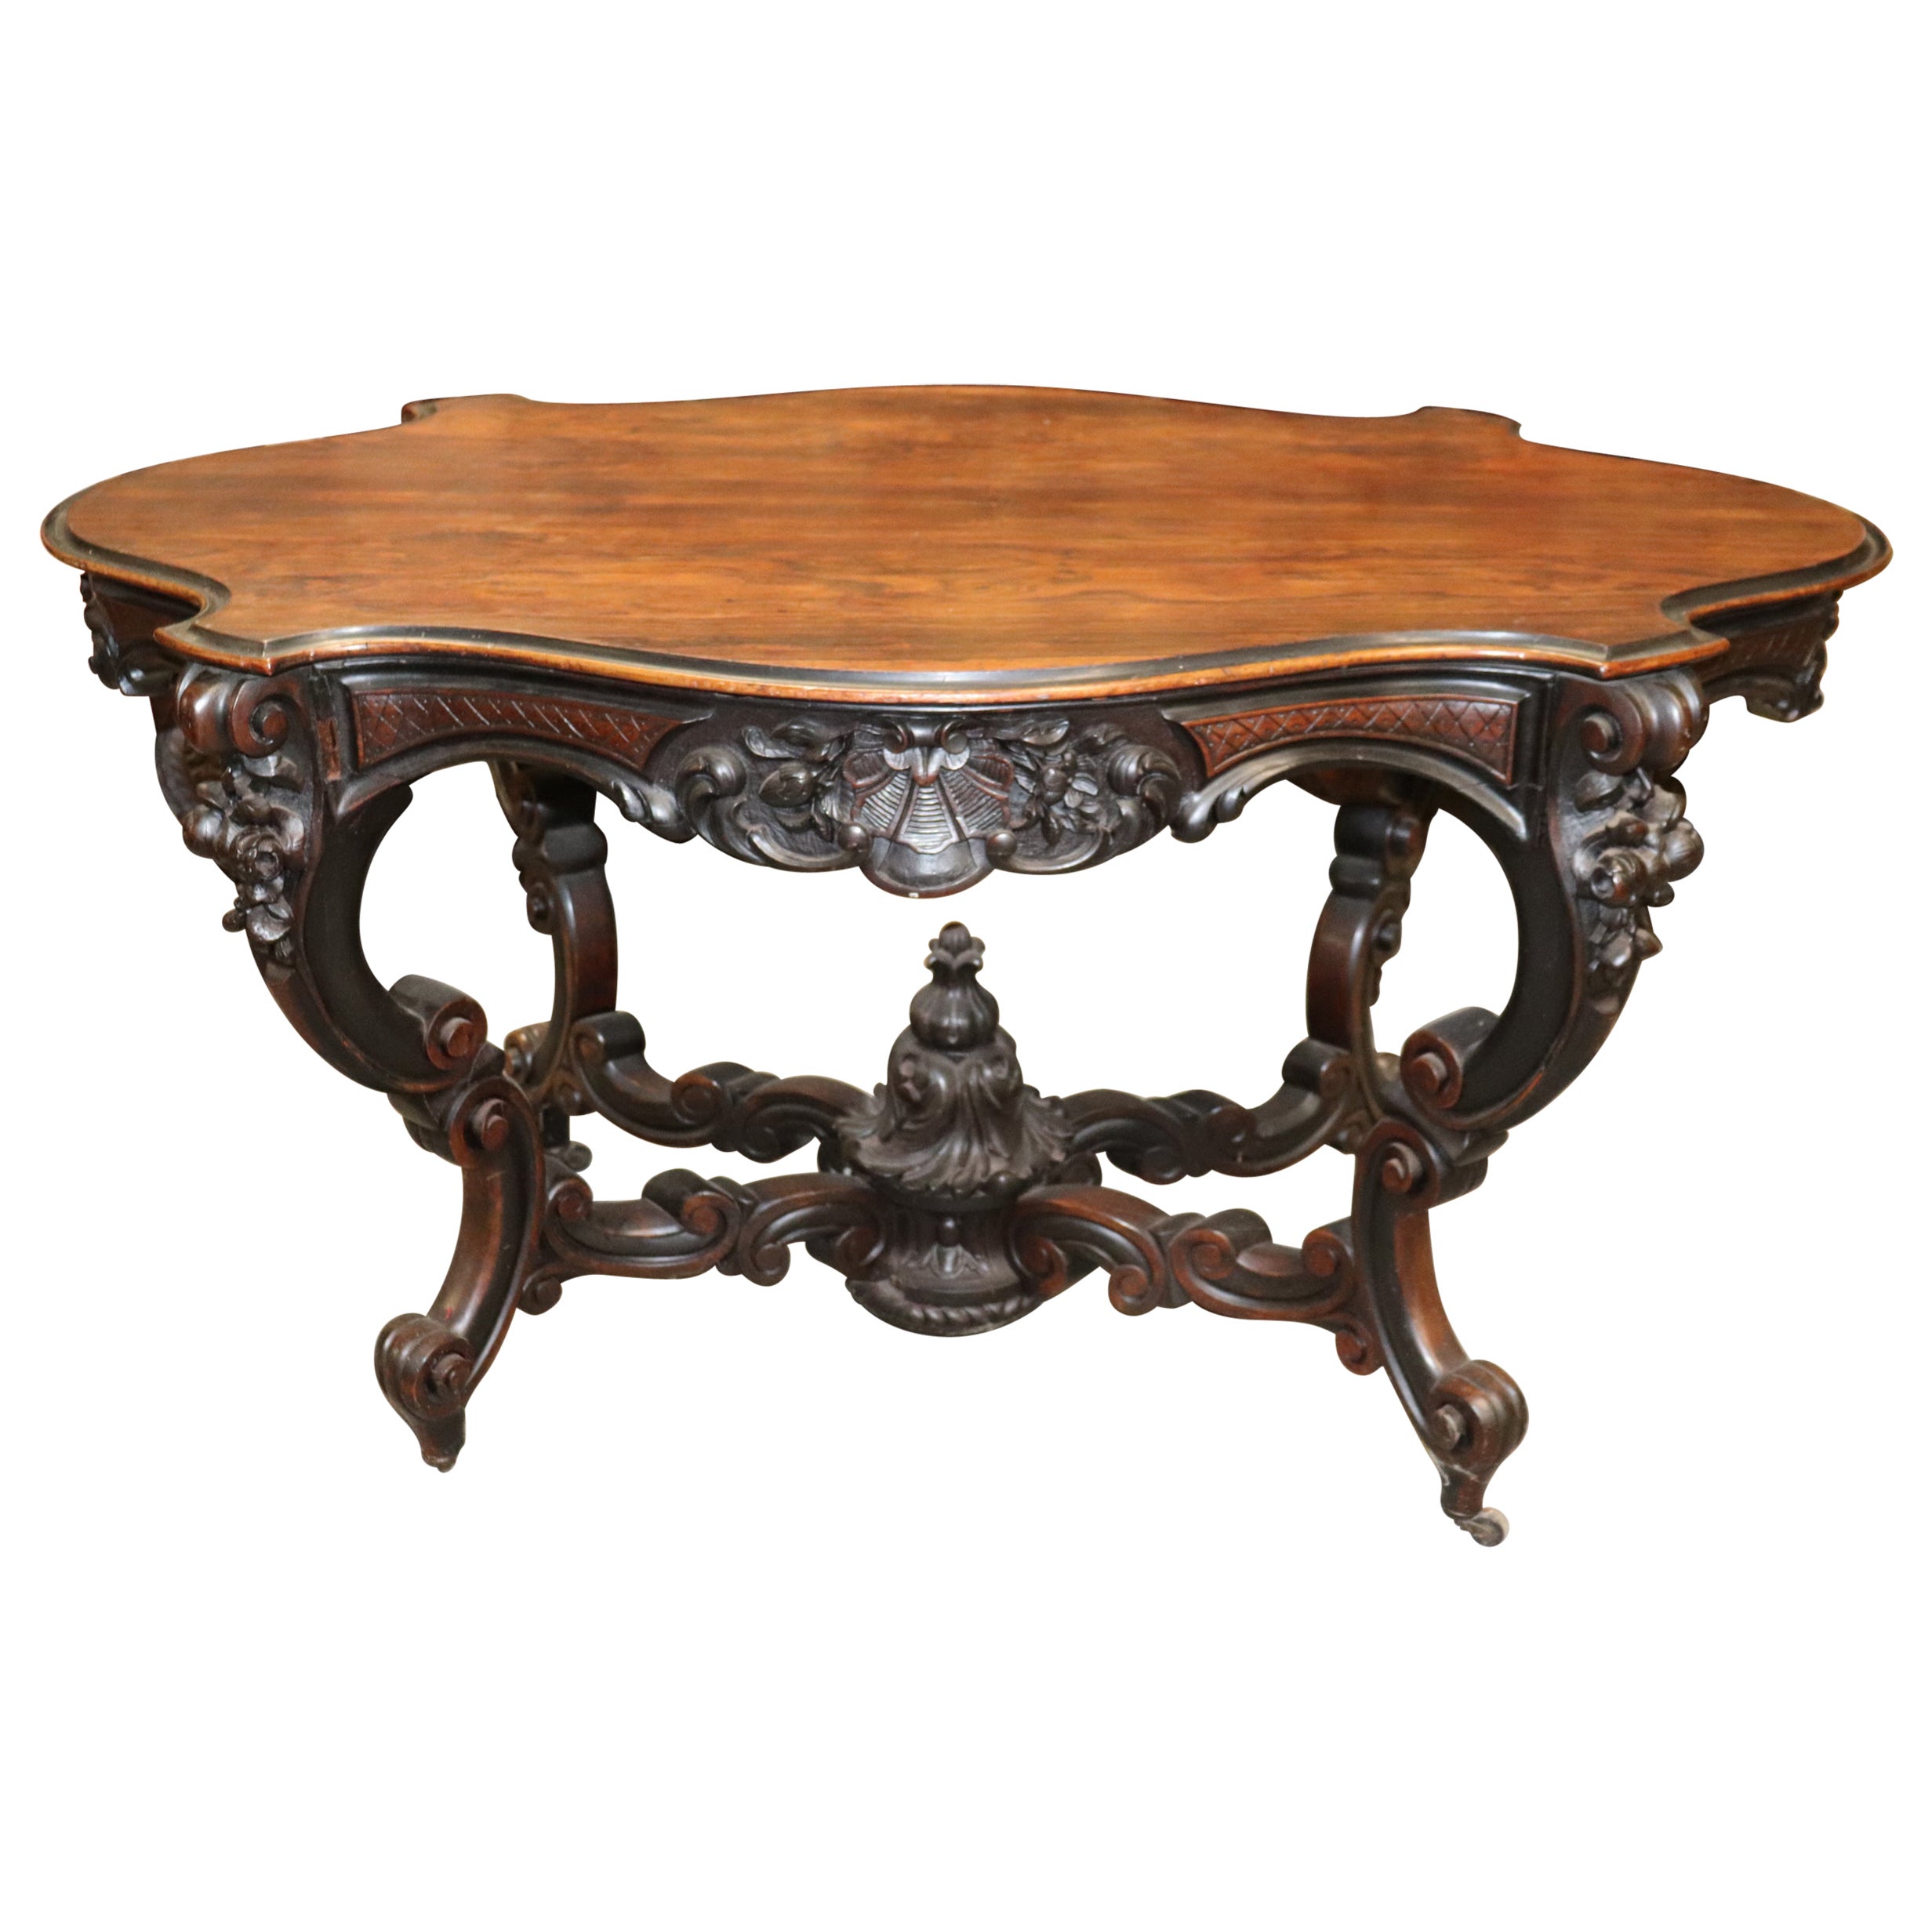 Fine American Victorian Carved Rosewood Center Table, circa 1860s